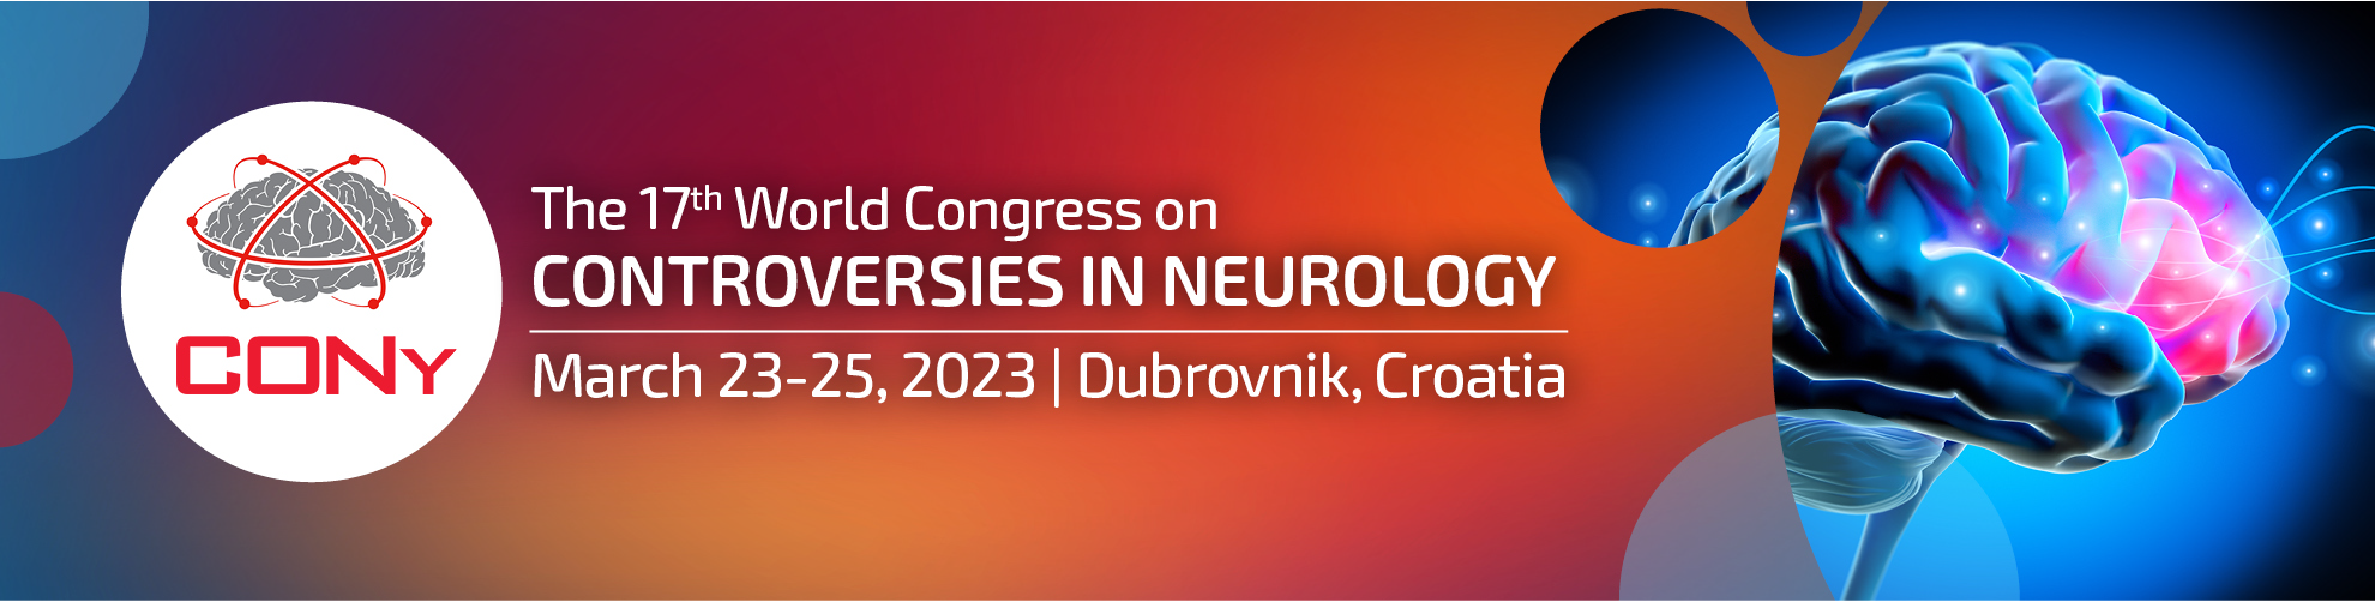 17th World Congress on Controversies in Neurology - CONy 2023